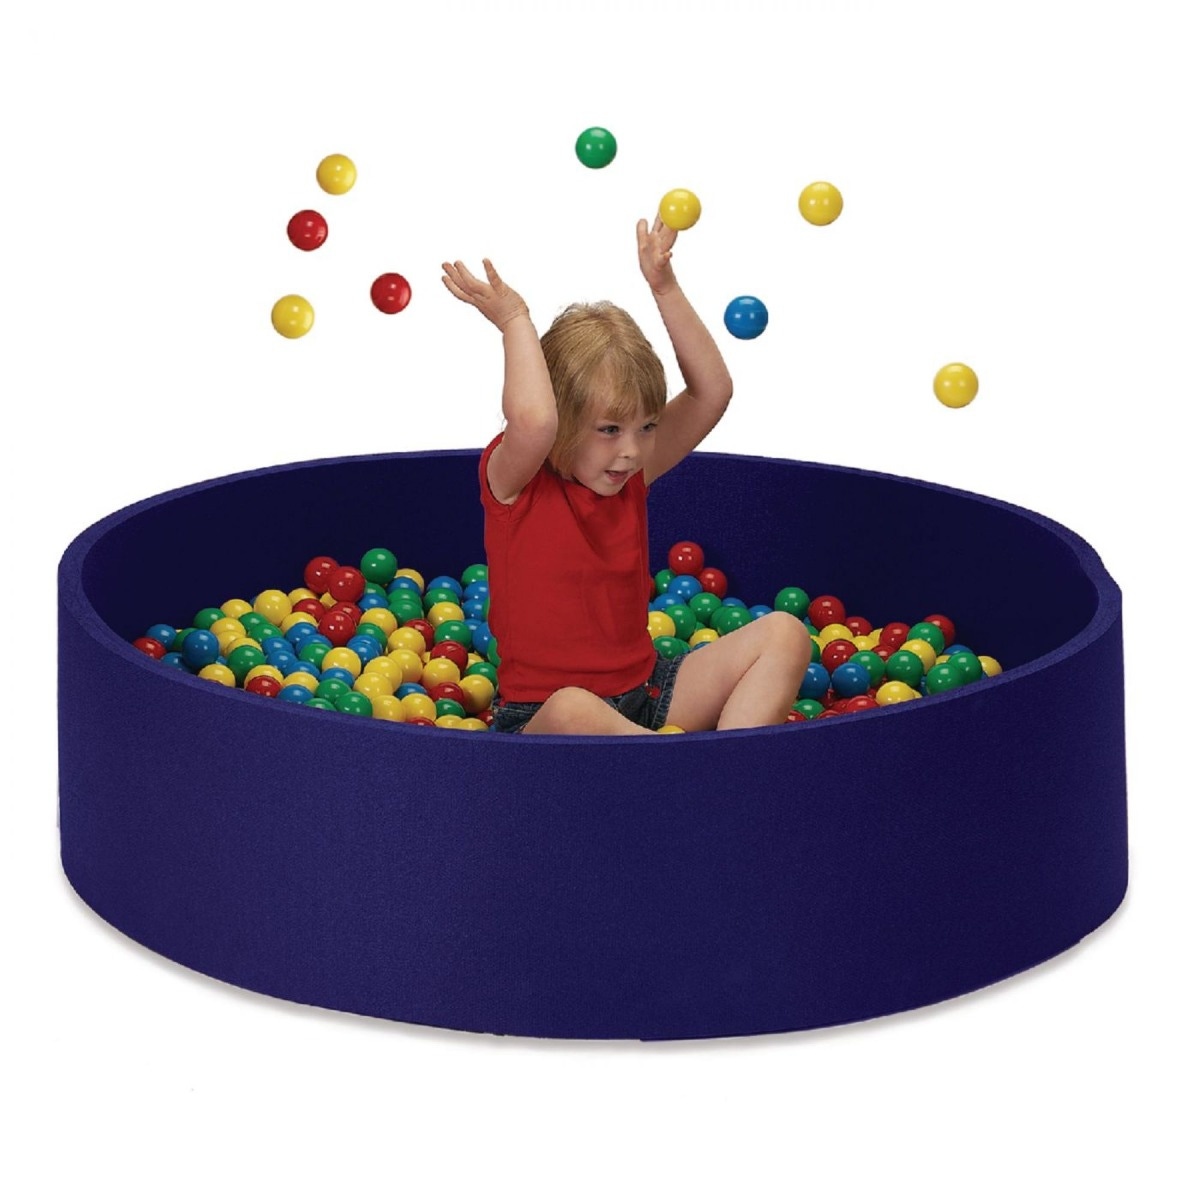 Child sitting in blue ball pit, joyfully tossing colorful balls into the air